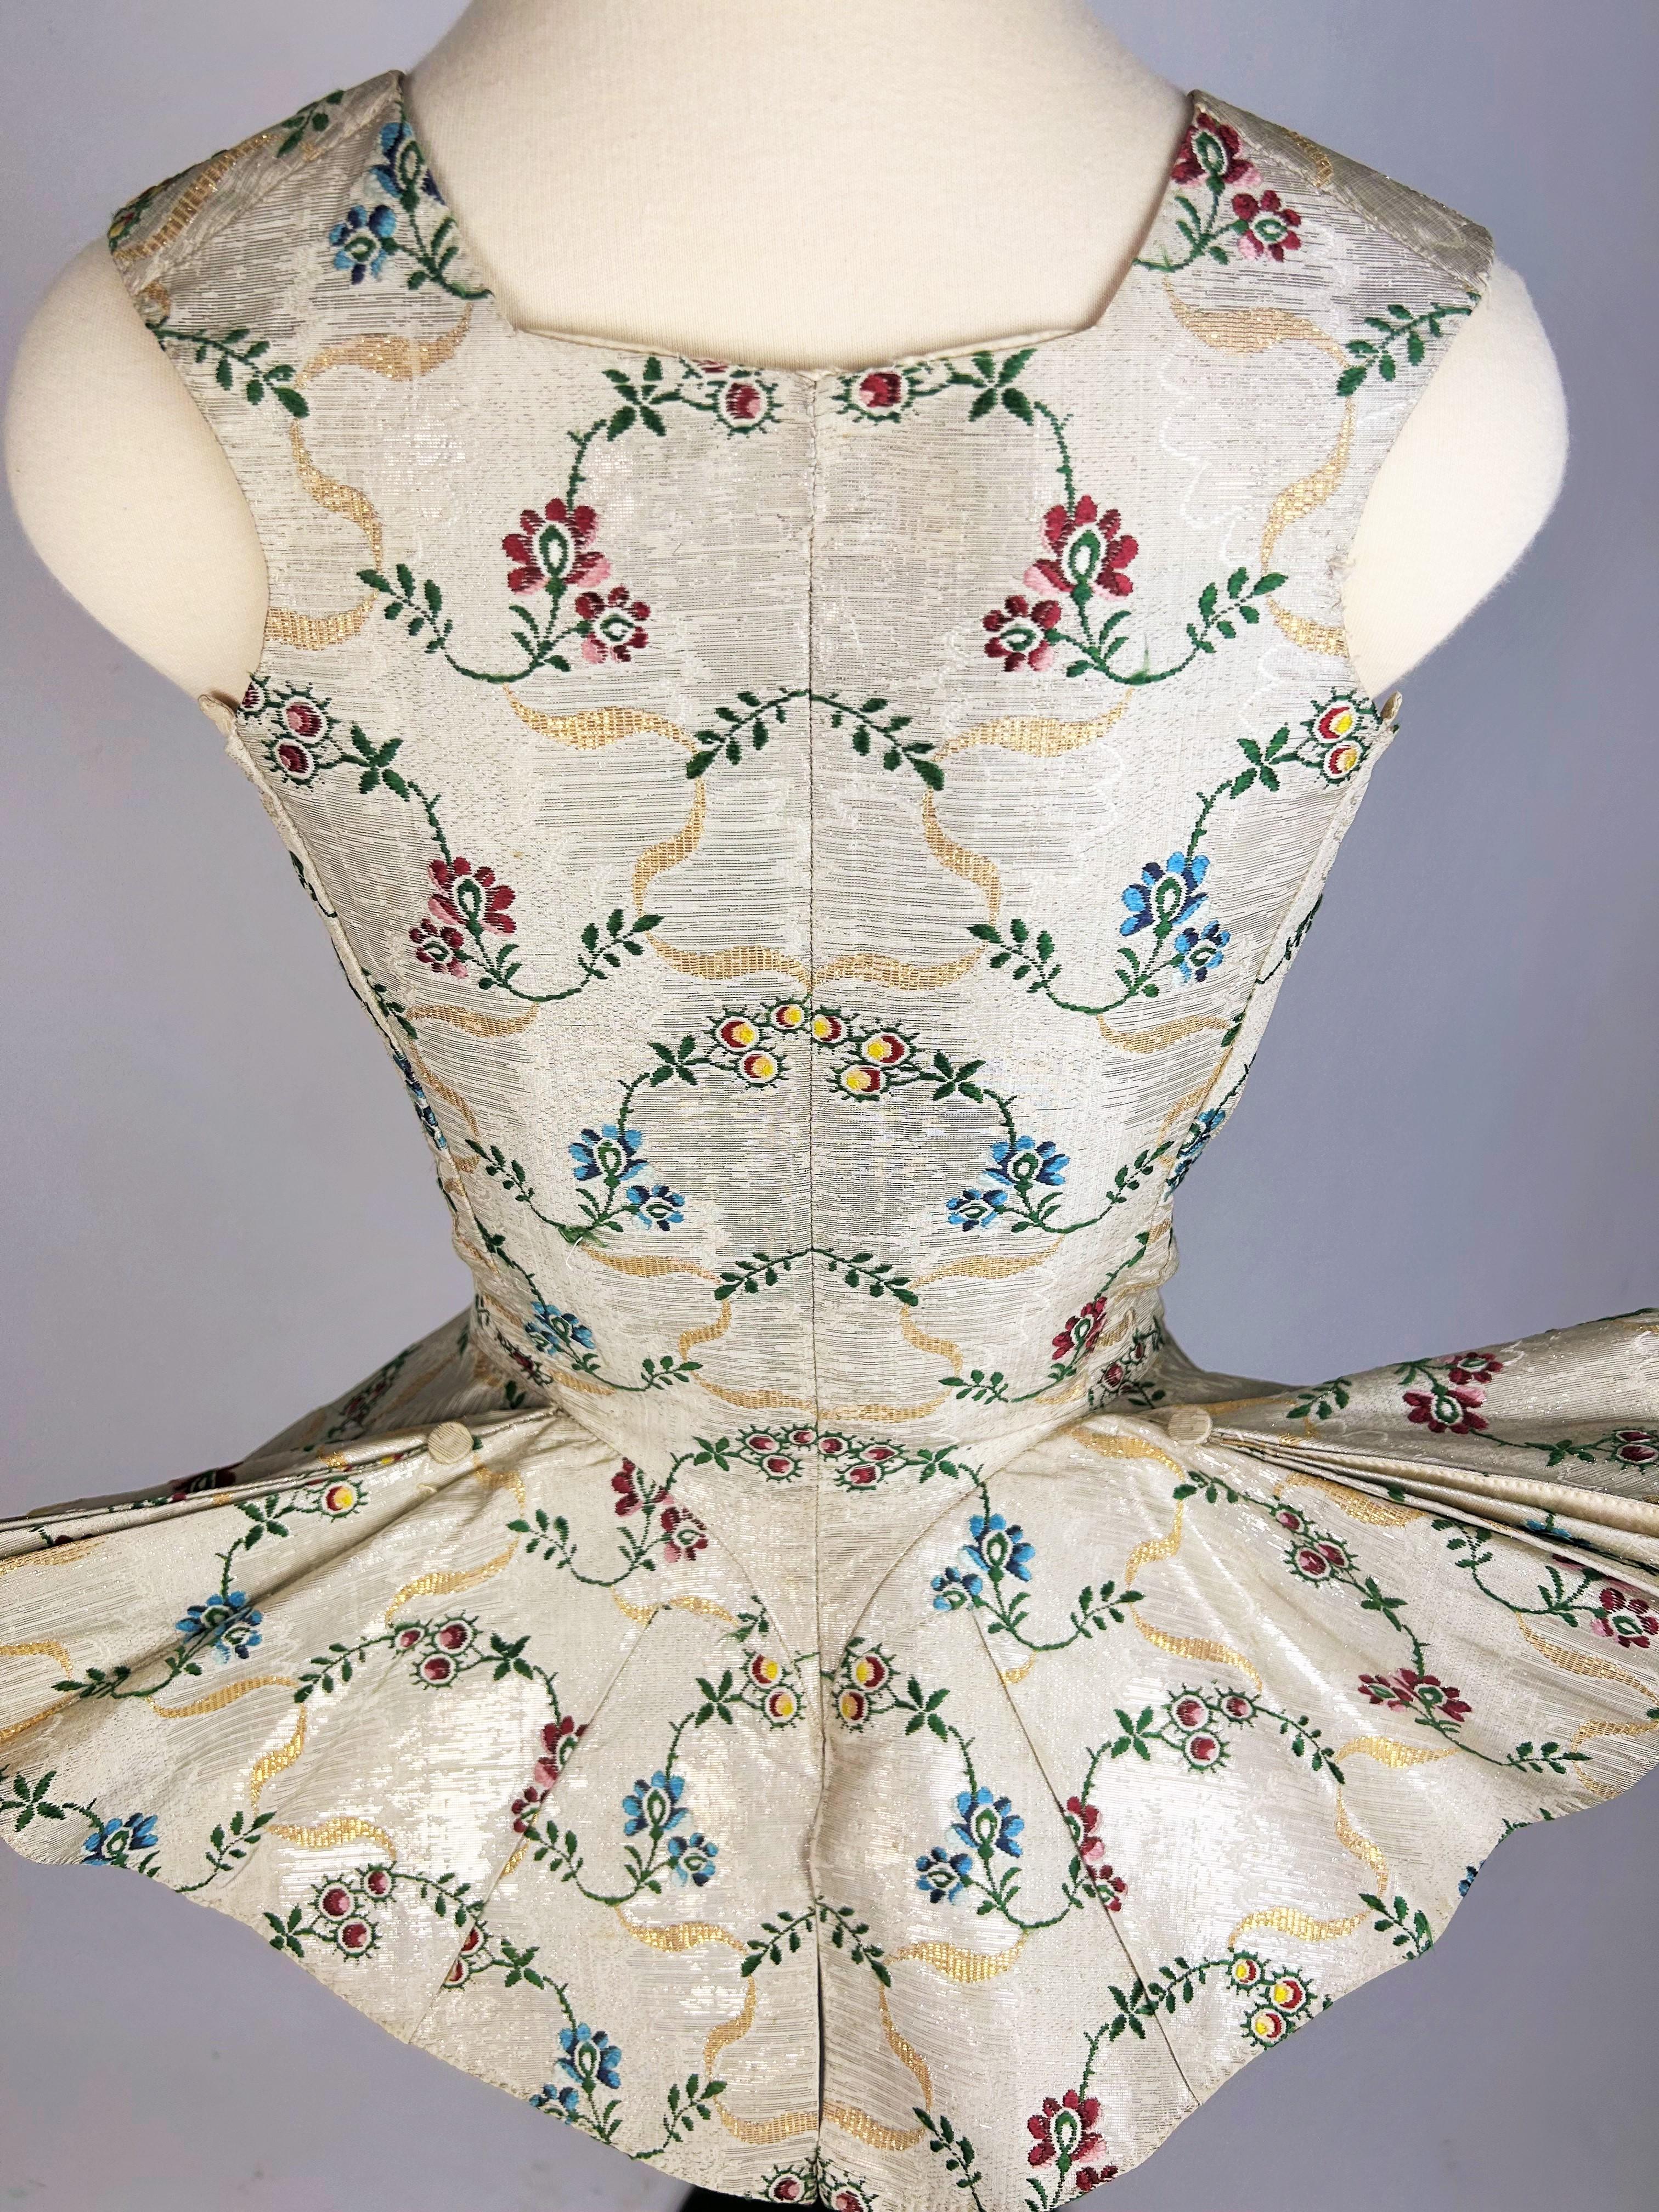 Amazon bodice in silver and gold lamé cloth - England or Europe Circa 1750-1760 In Excellent Condition For Sale In Toulon, FR